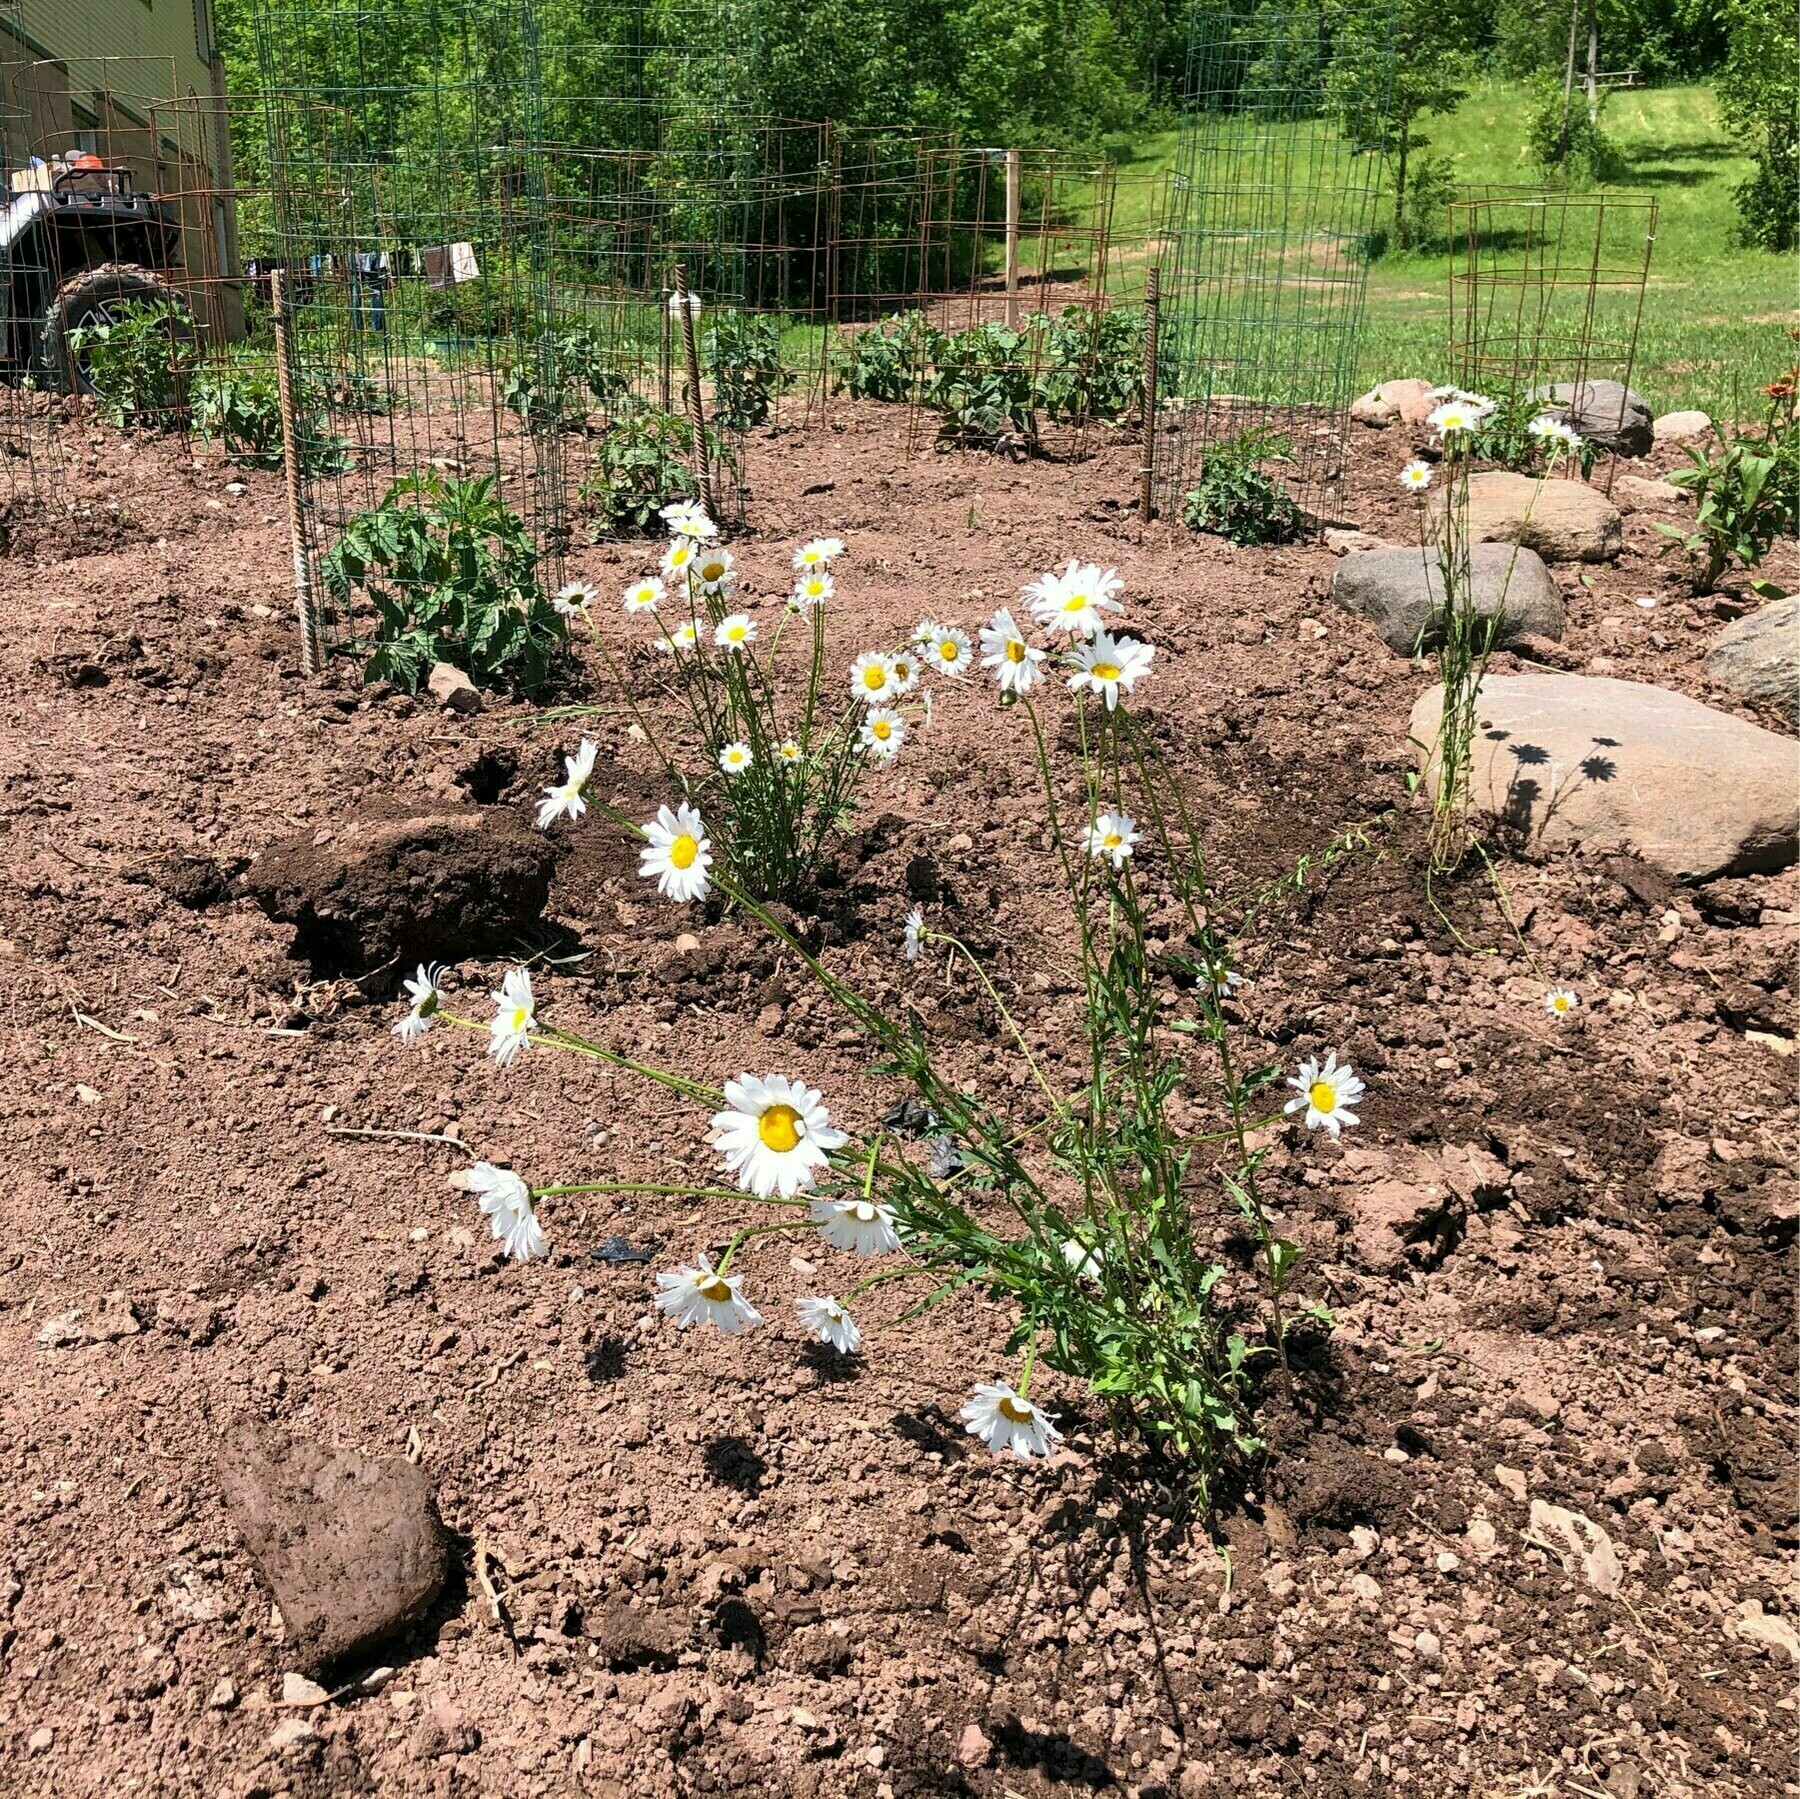 several daisy plants beside large rocks with tomato plants in wire cages behind